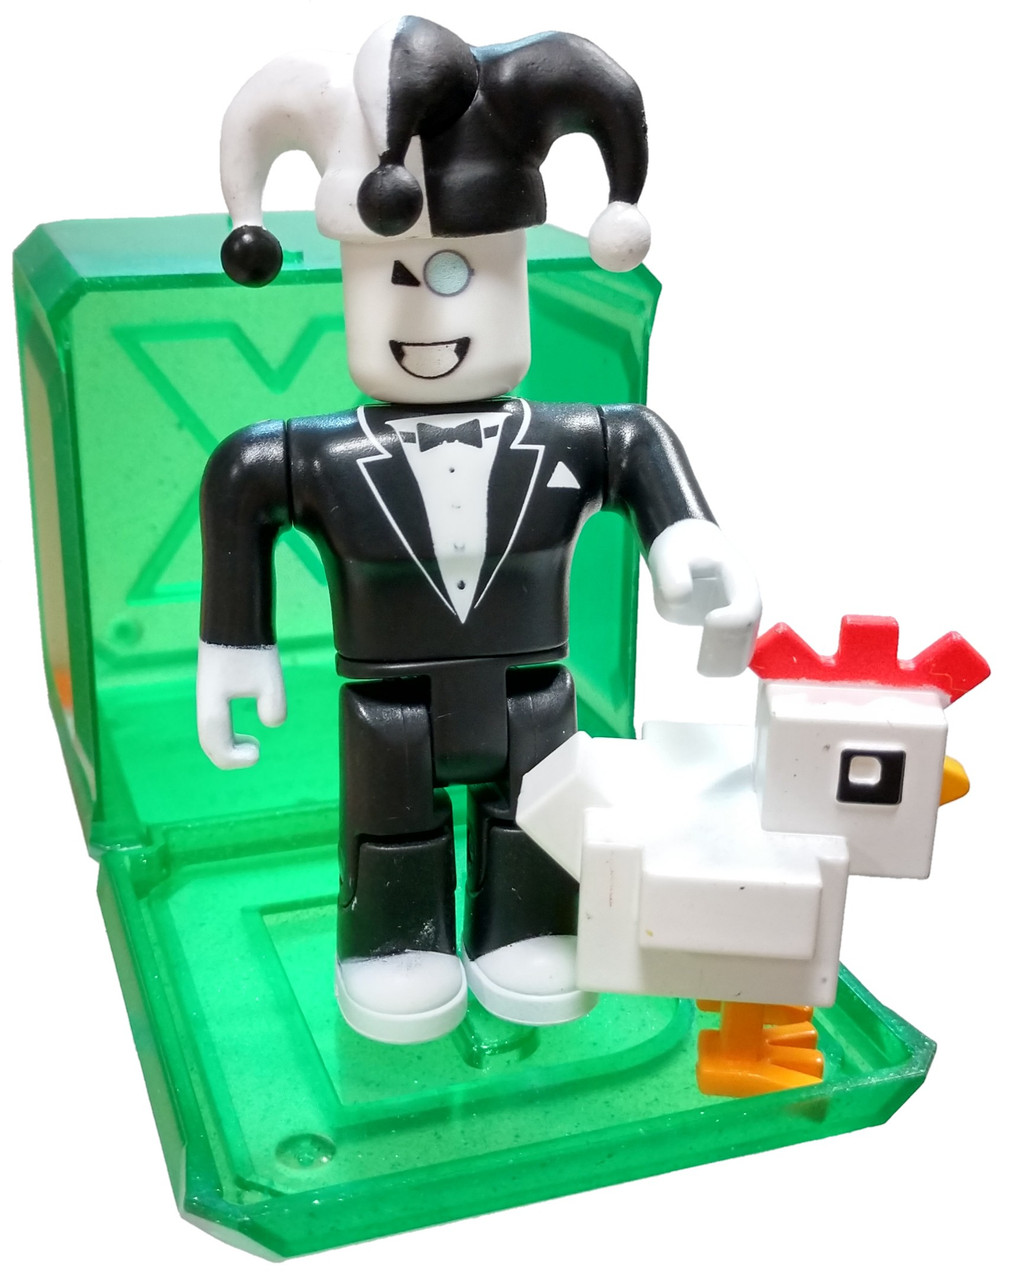 Roblox Celebrity Collection Series 4 Sirming 3 Mini Figure With Green Cube And Online Code Loose Jazwares Toywiz - roblox newcomer legend promo code roblox english gaiia